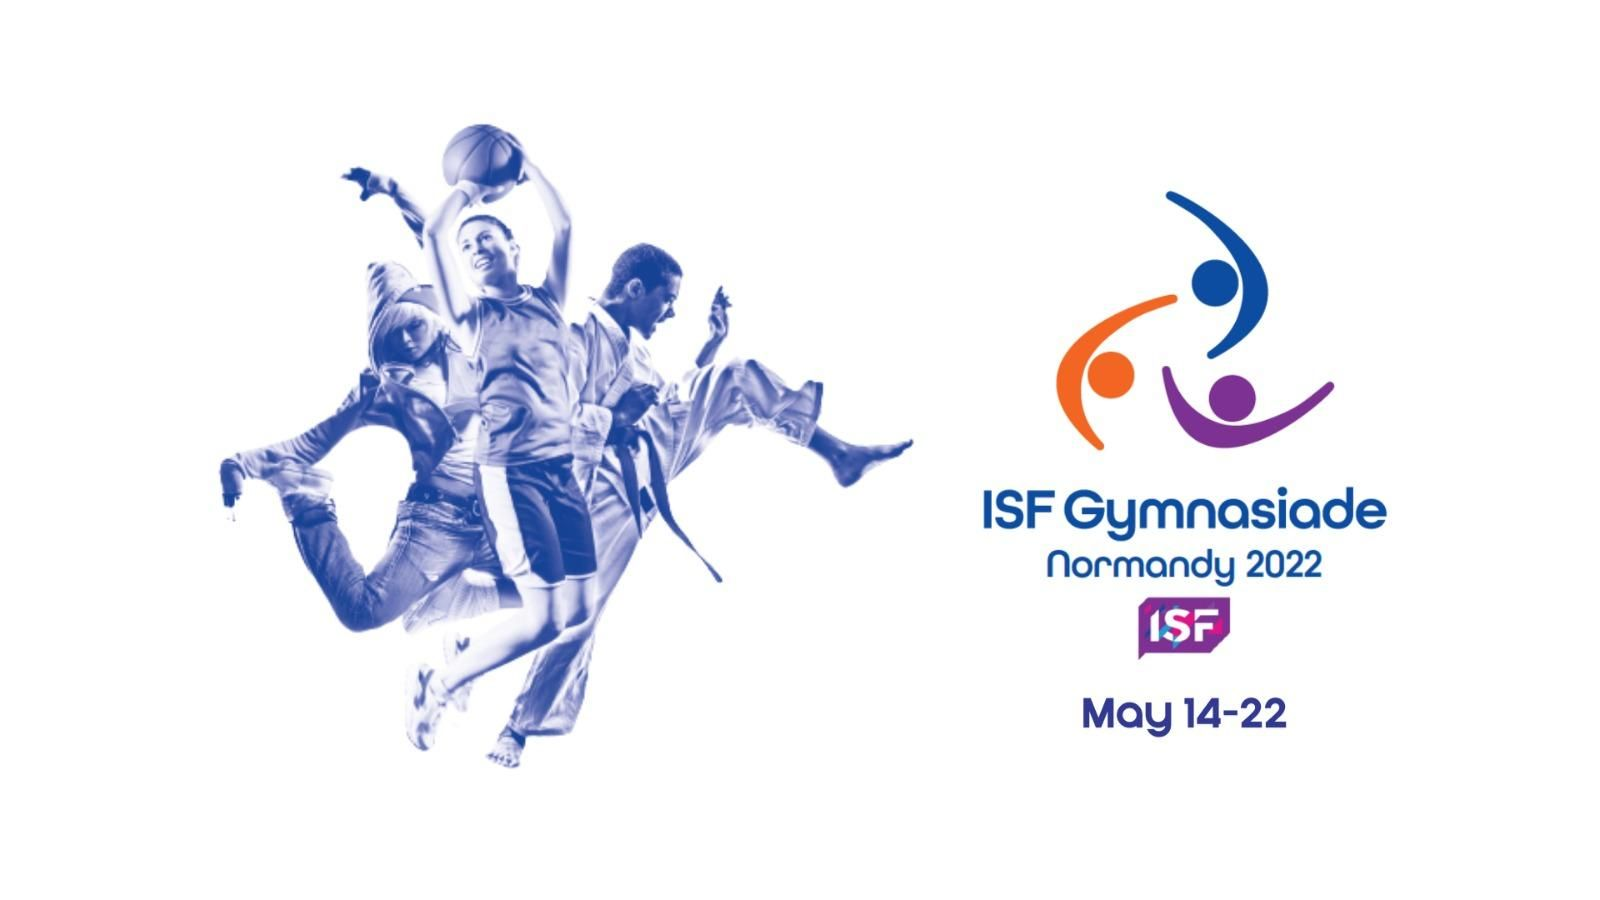 France and Brazil accumulated the most medals at the 2022 ISF Gymnasiade ©ISF